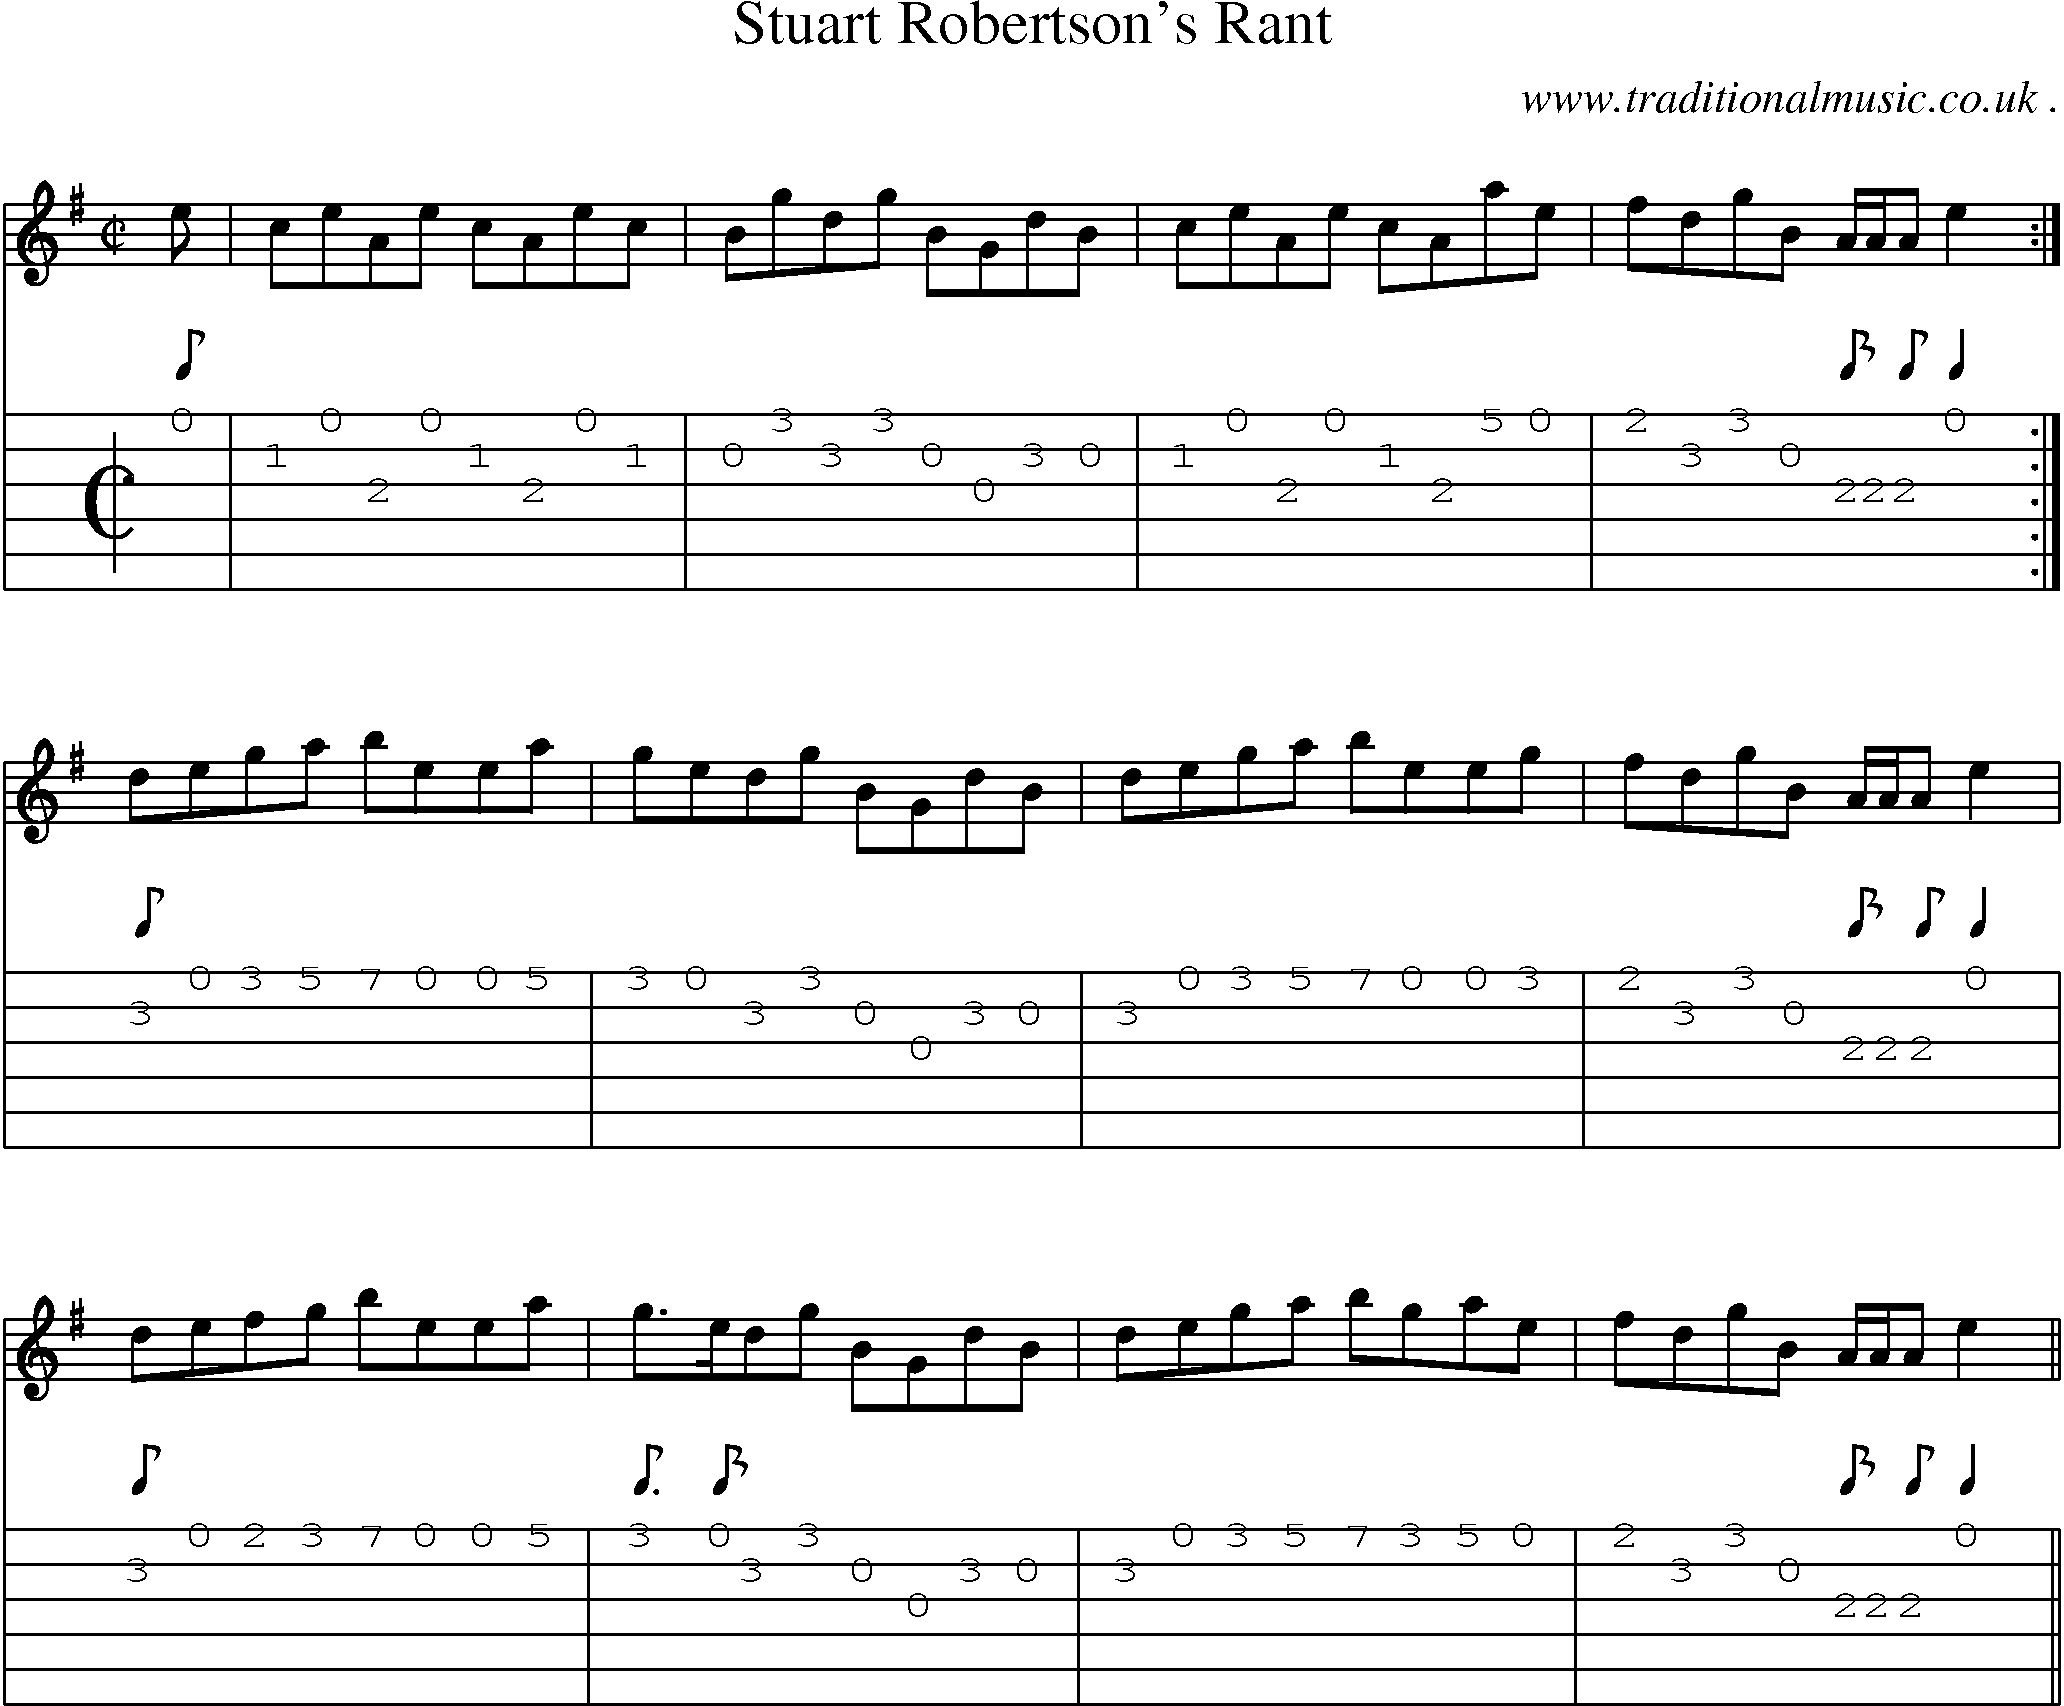 Sheet-Music and Guitar Tabs for Stuart Robertsons Rant